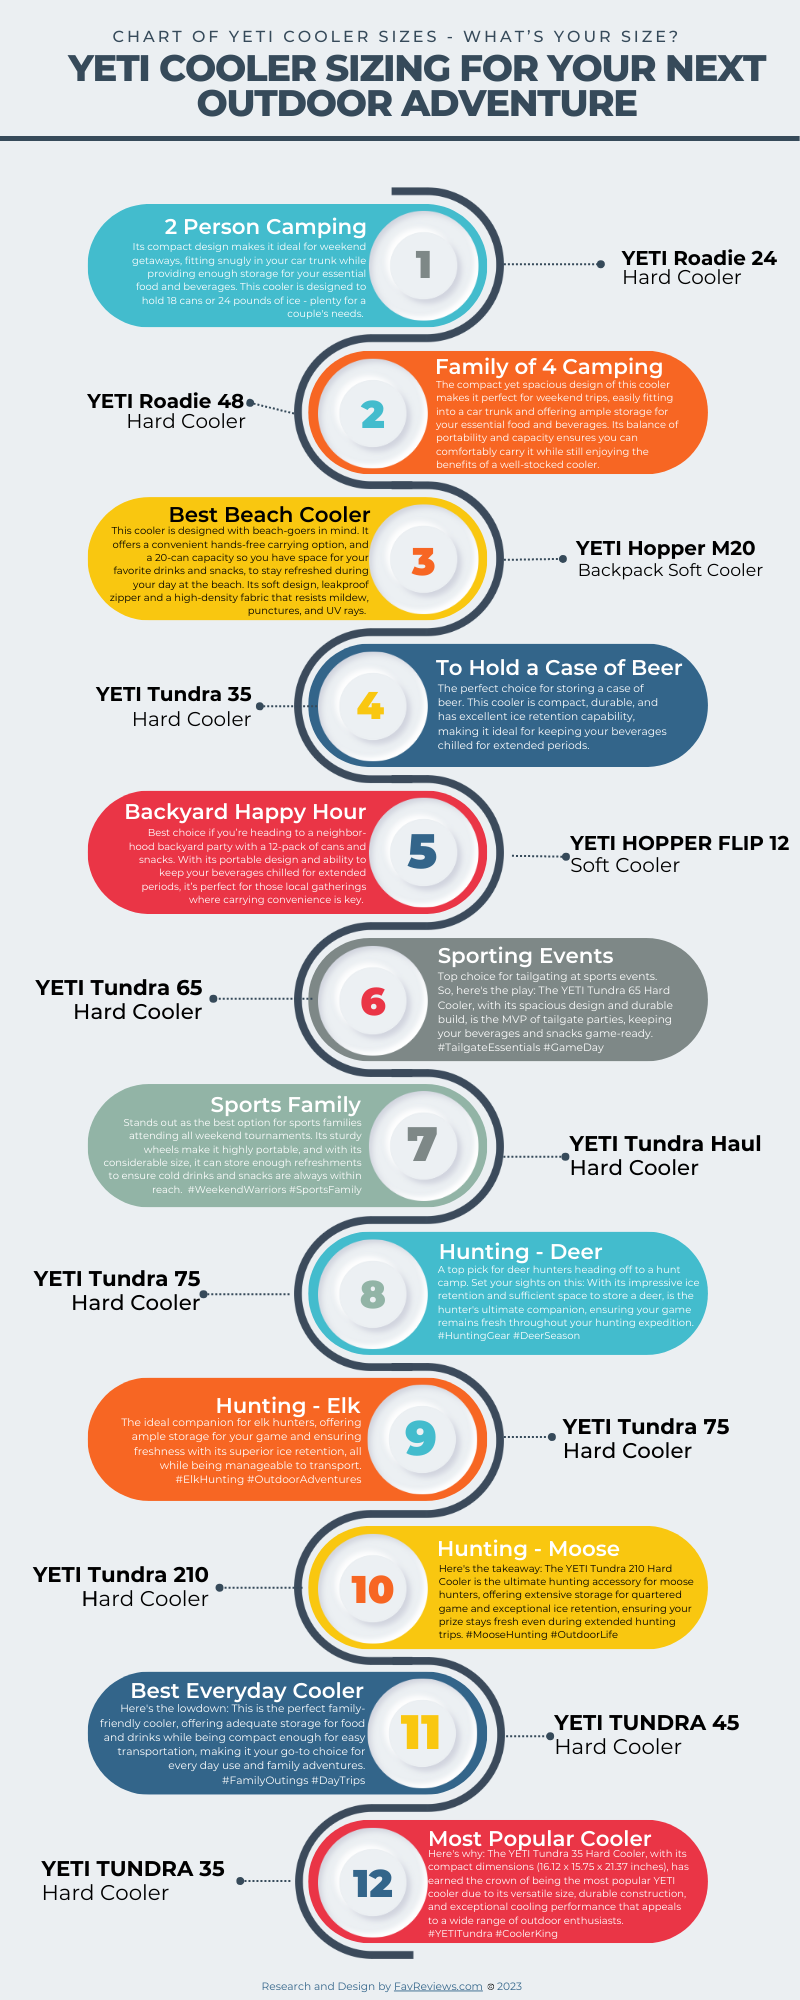 Yeti Cooler Sizing by Activity, Infographic by FAV Reviews